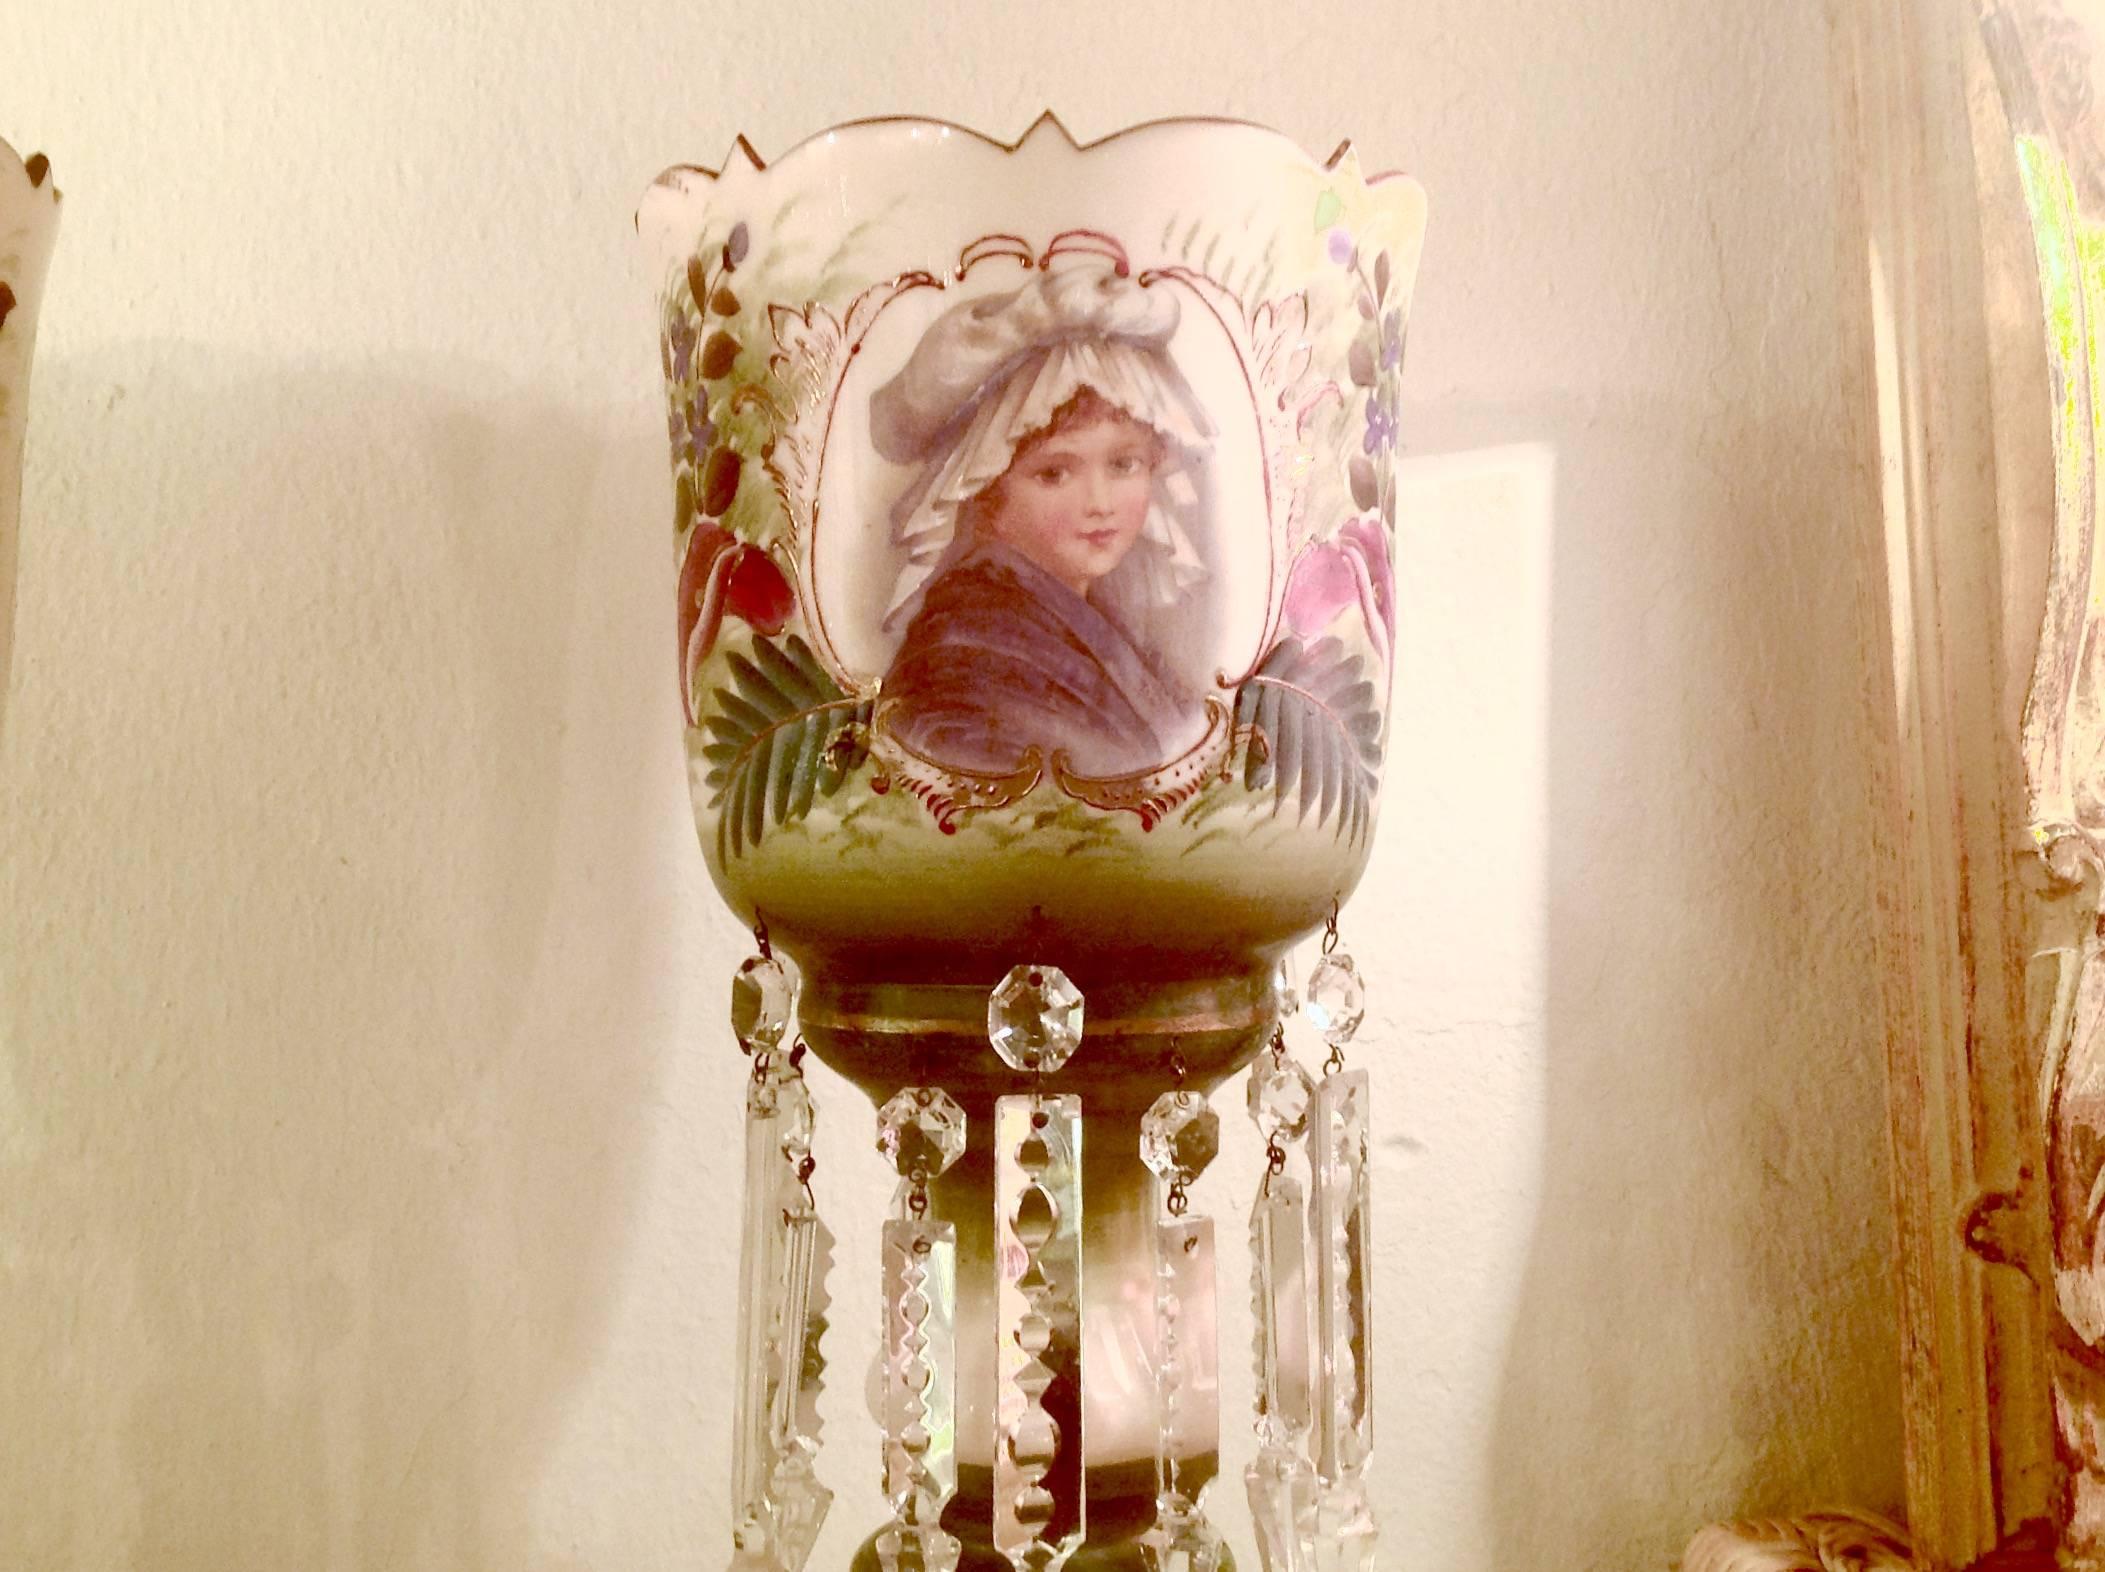 Pair of Victorian hand-painted glass mantel lustre vases, with spear cut prisms, circa 1880. Two different portraits on either side, measure 15 inches high and 7 inches in diameter.